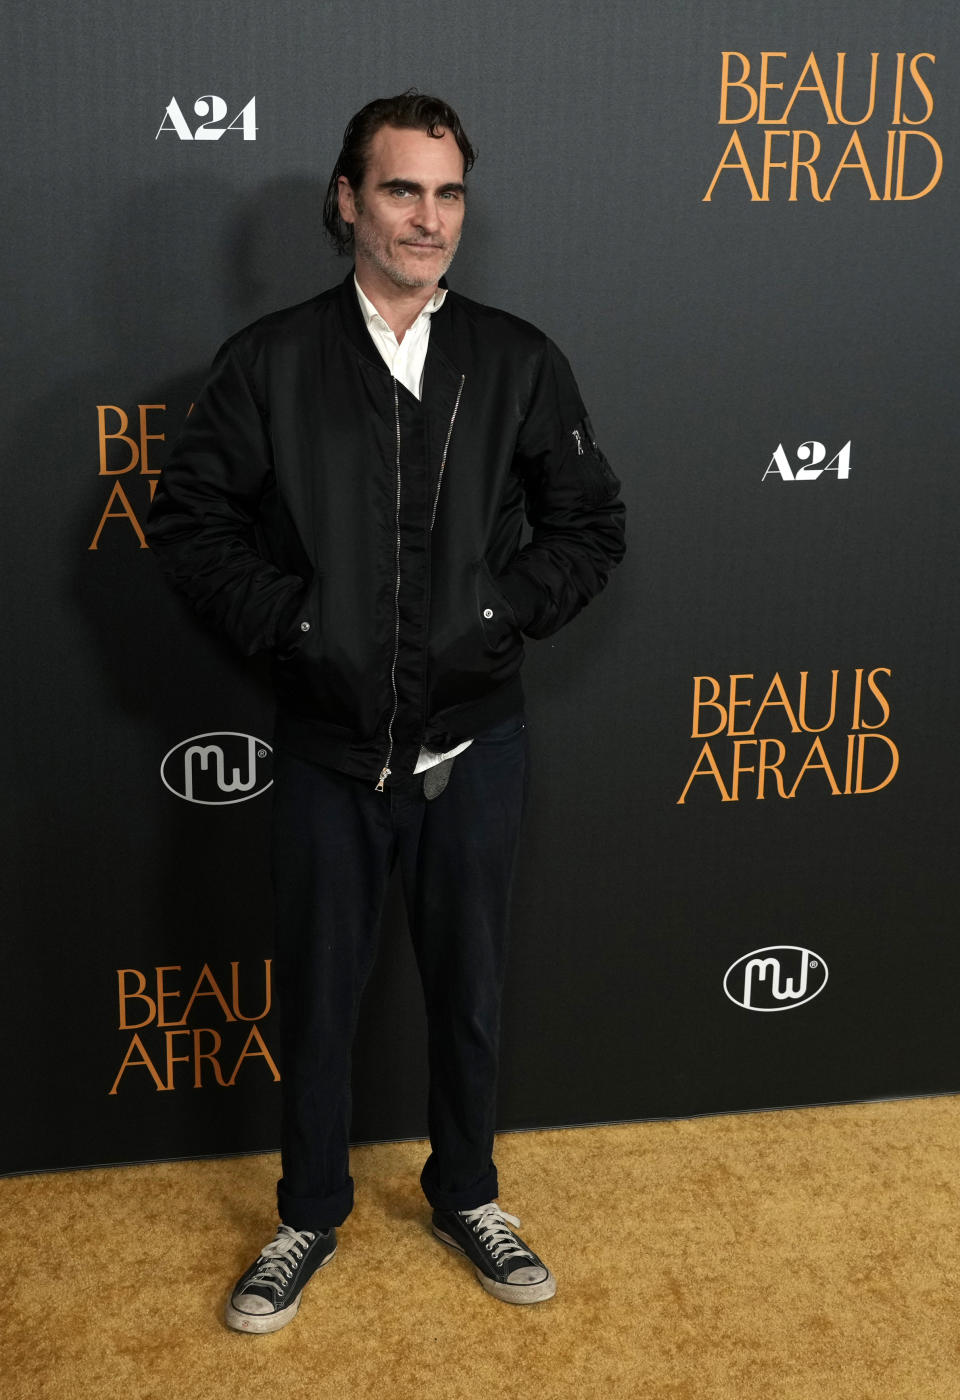 Joaquin Phoenix, star of "Beau Is Afraid," poses at the premiere of the film, Monday, April 10, 2023, at the Directors Guild of America in Los Angeles. (AP Photo/Chris Pizzello)